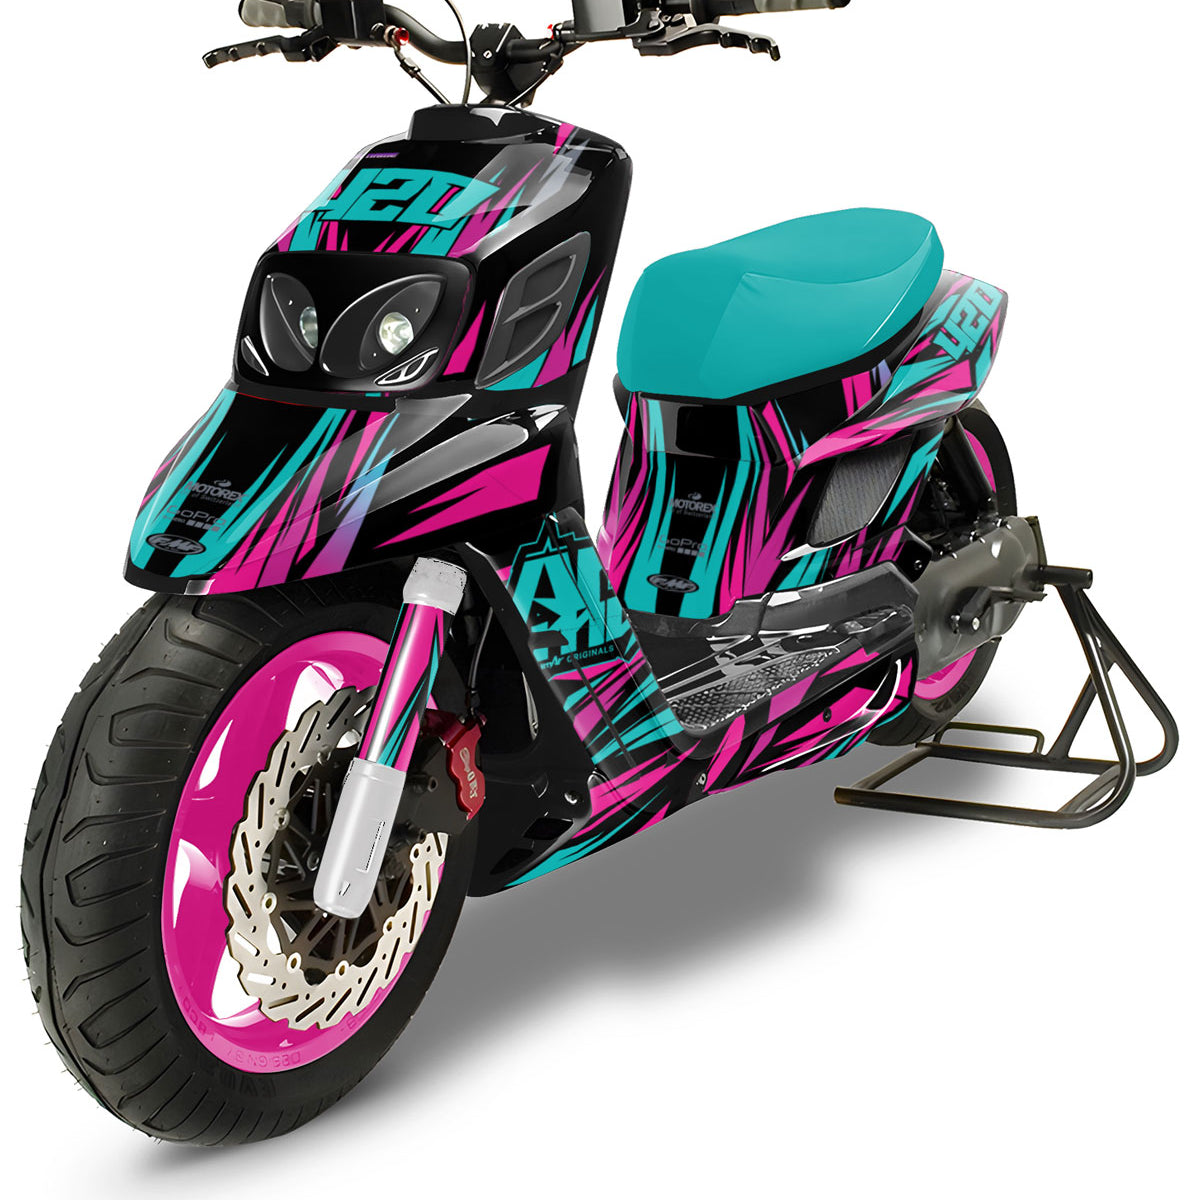 Graphic decals 50cc MBK Booster / Yamaha BW's RX BCD Electrify